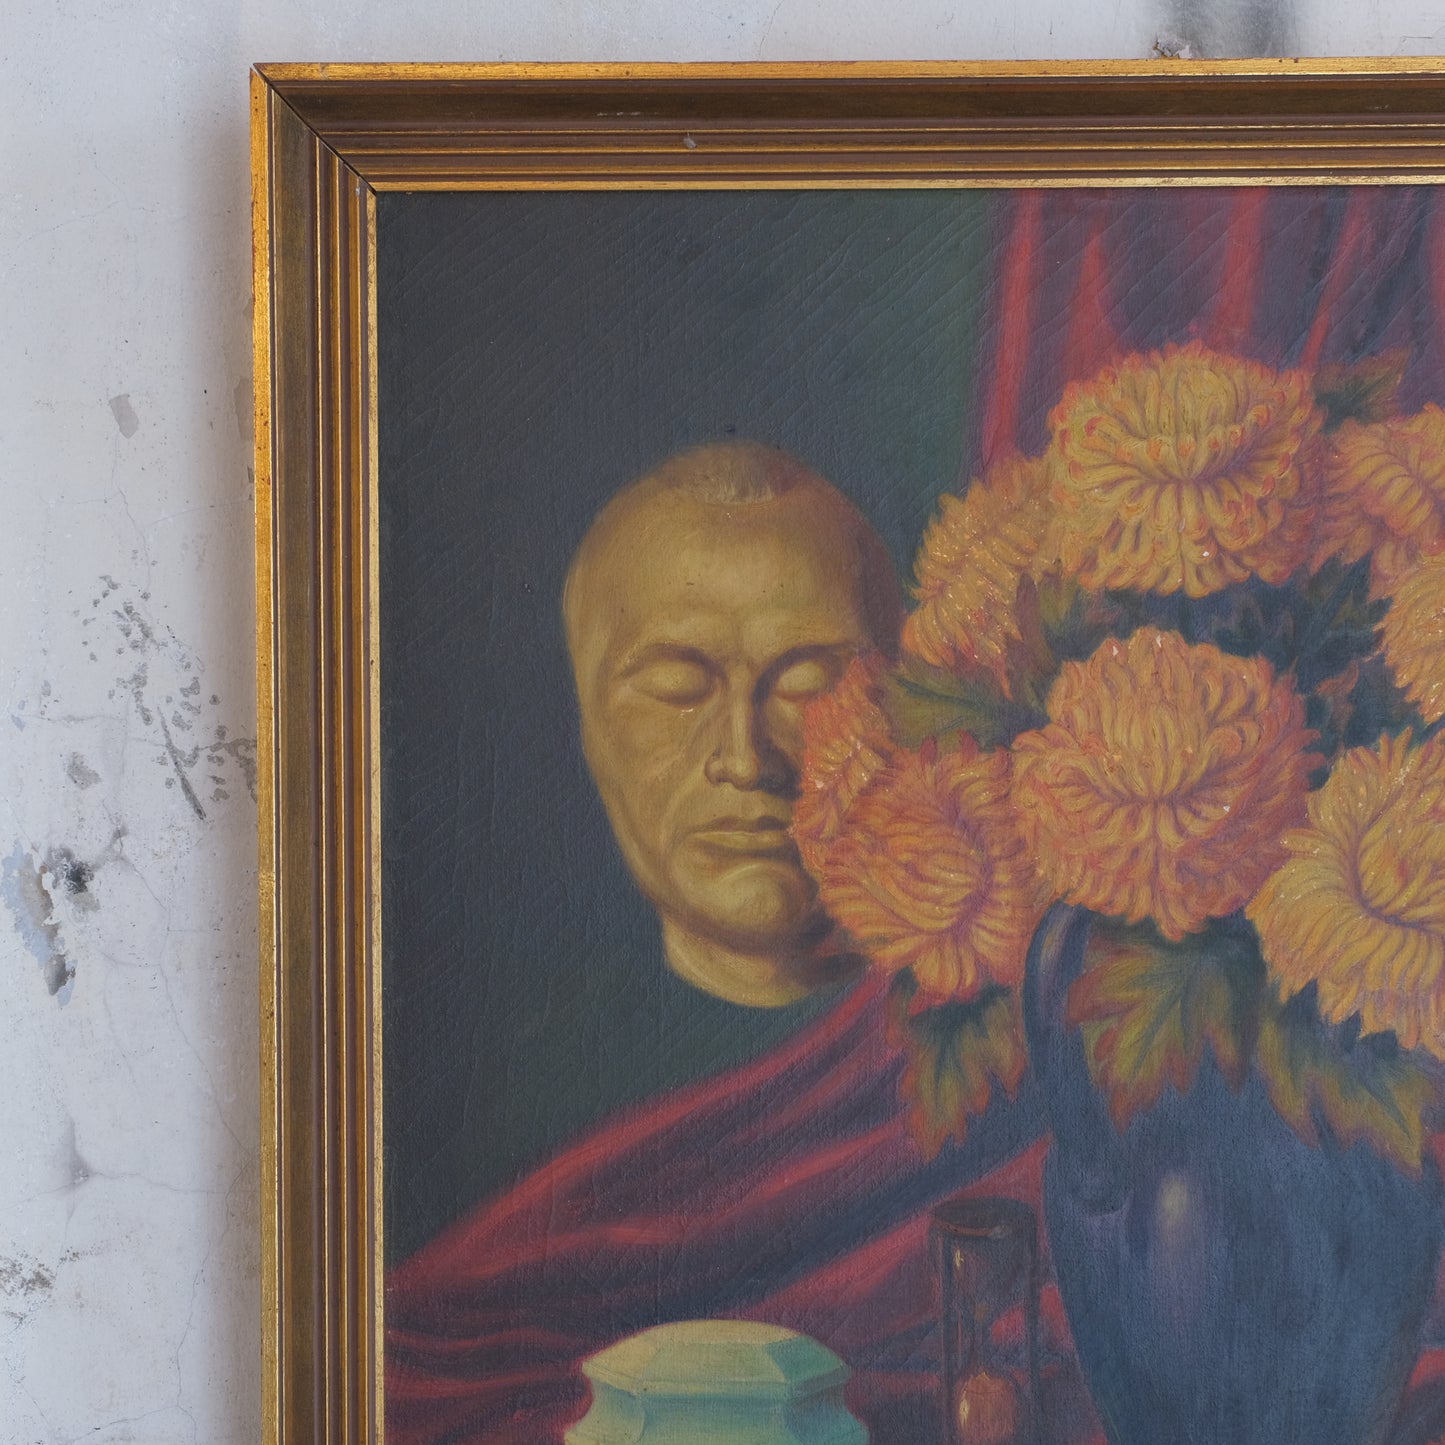 Death Mask & Floral Still Life Painting